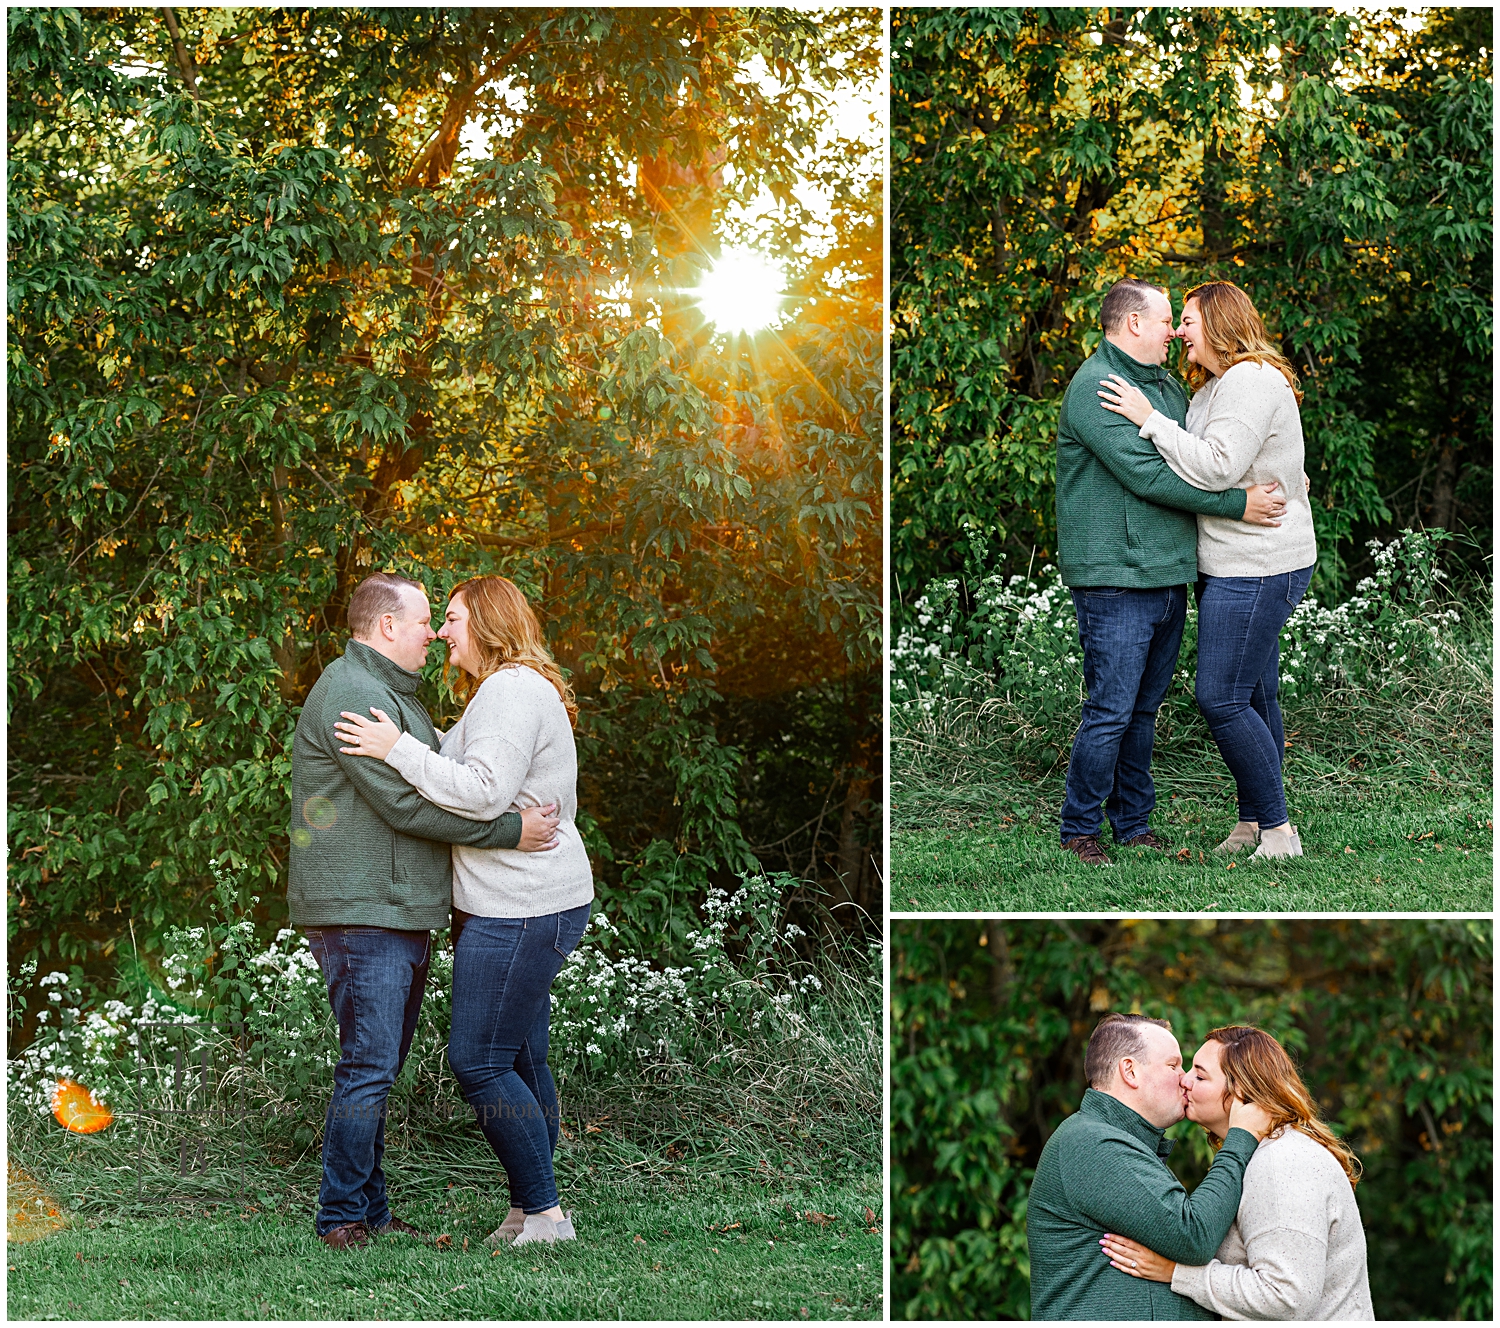 Man in green sweater embraces fiance for engagement photos during golden hour.